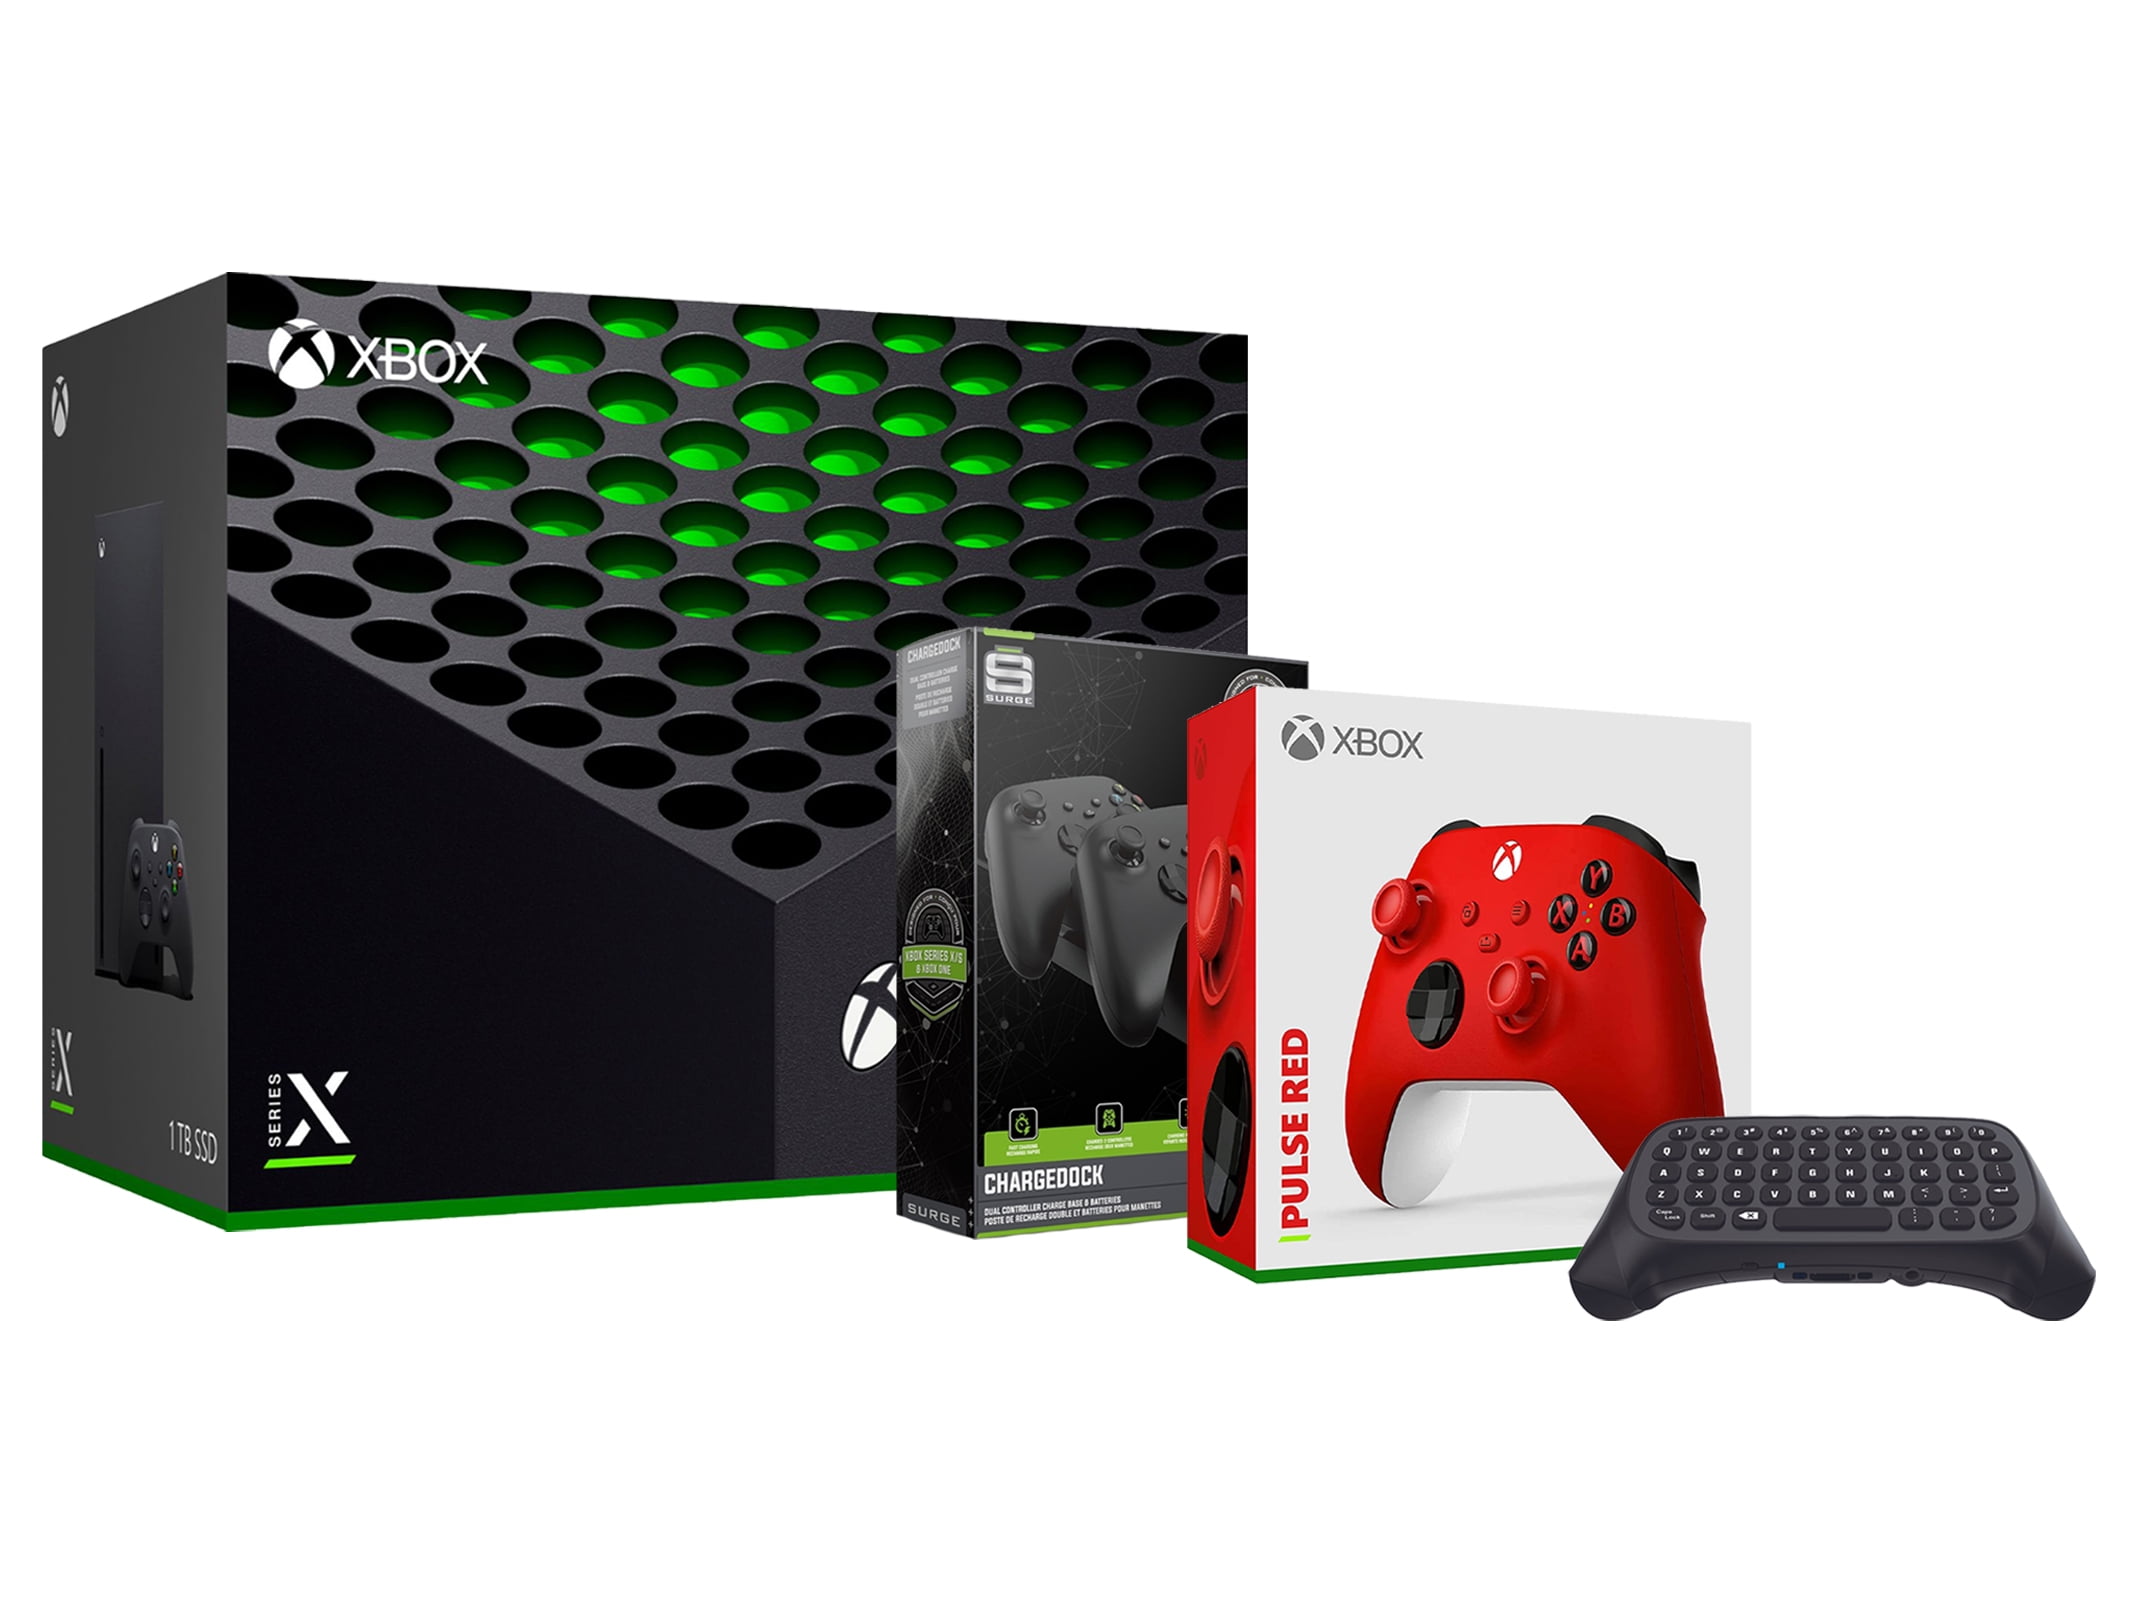 Xbox Series X Video Game Console Black w/ Extra Controller and Mightyskins  Voucher - Pulse Red